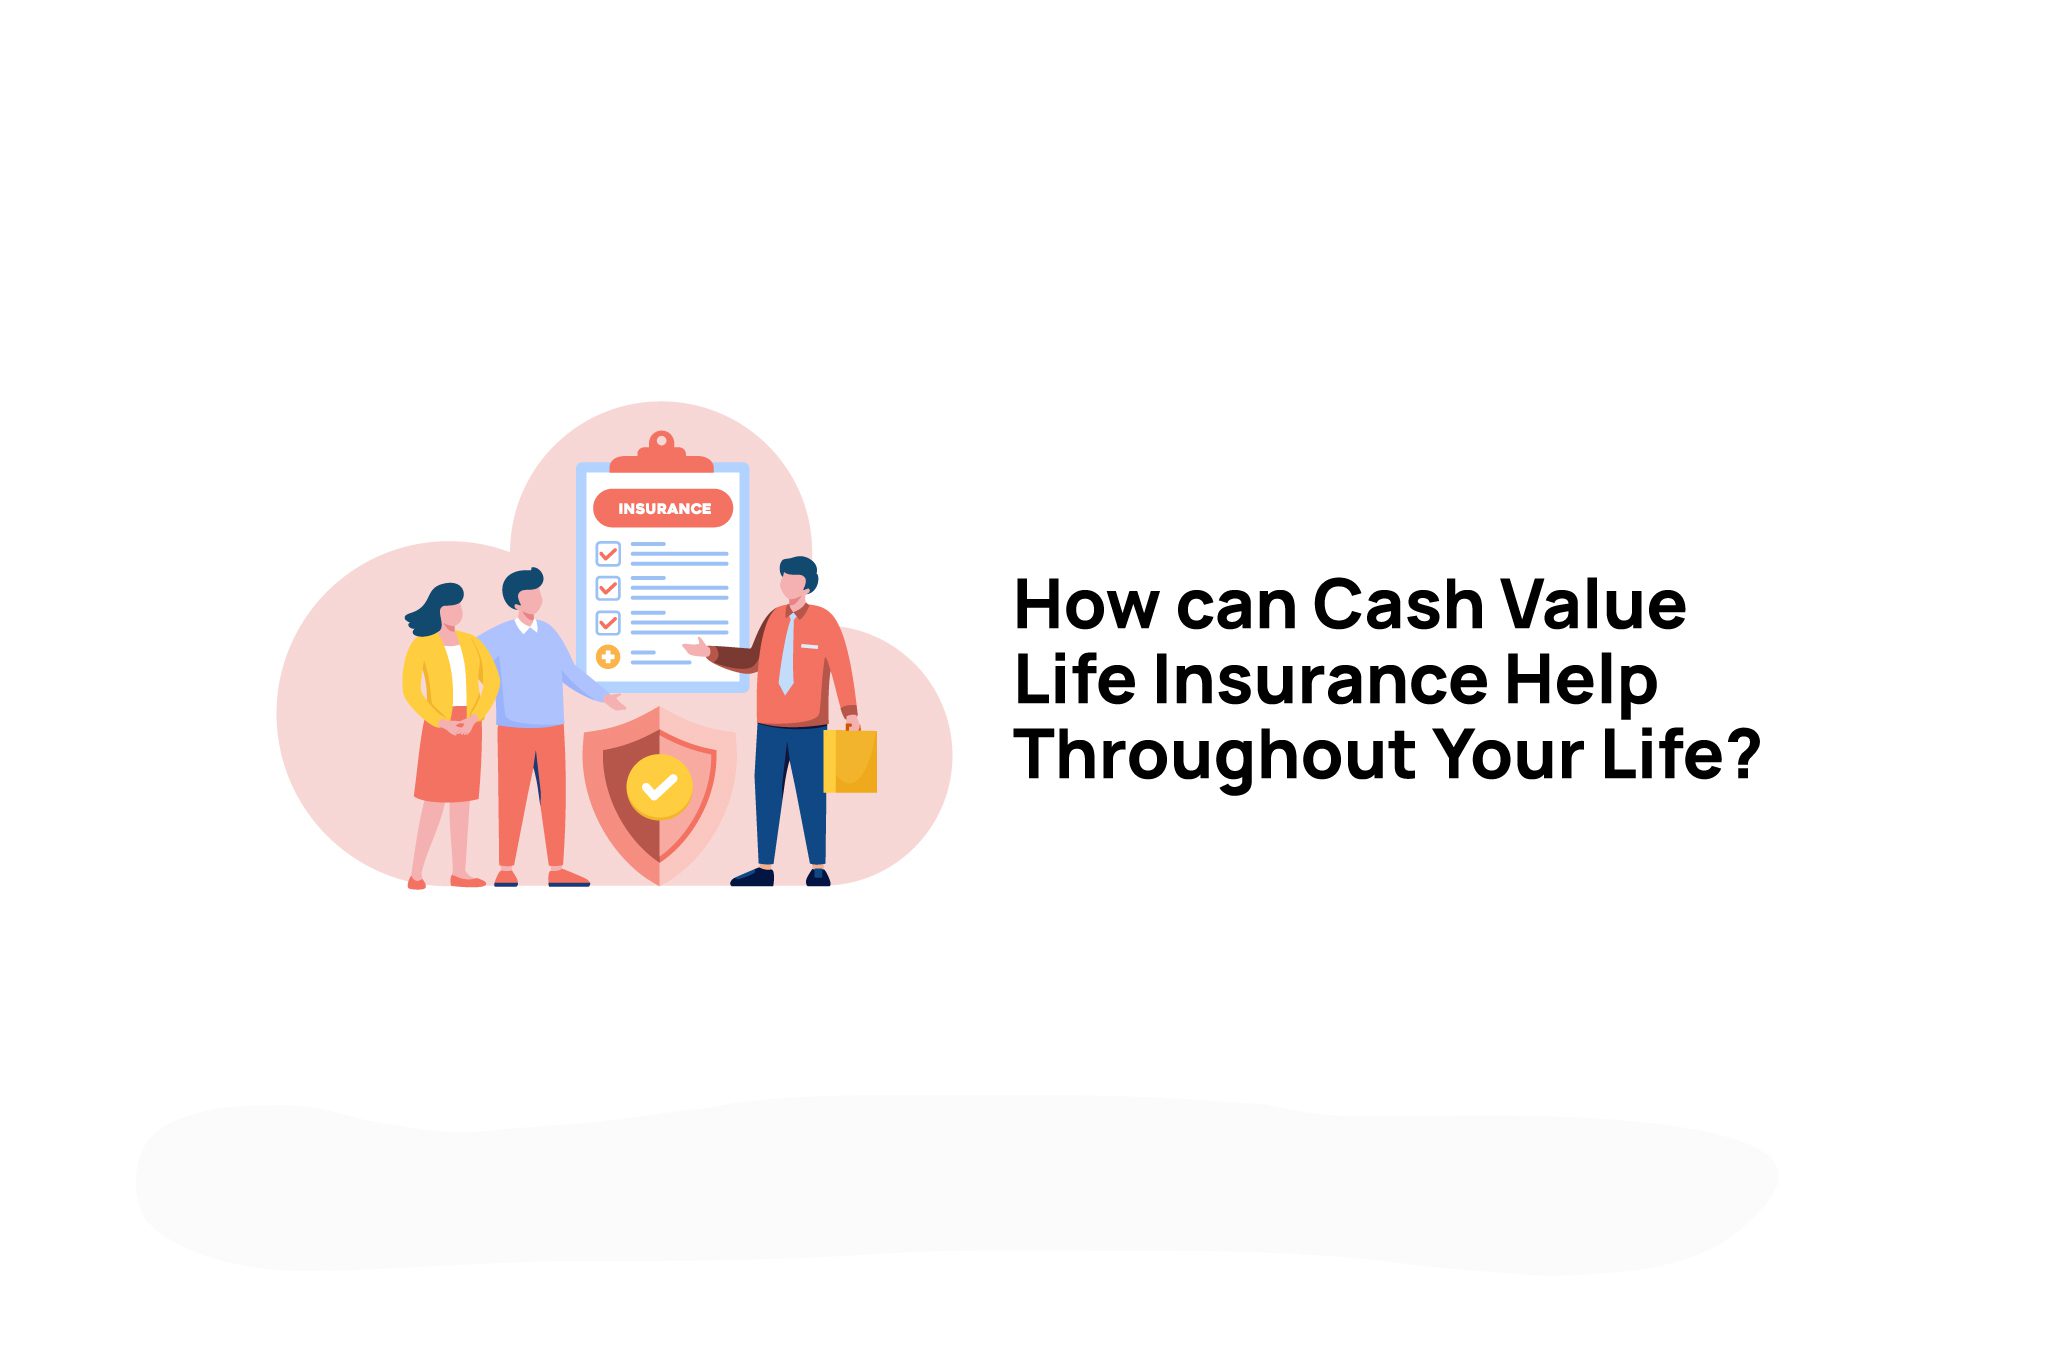 How can Cash Value Life Insurance Help Throughout Your Life